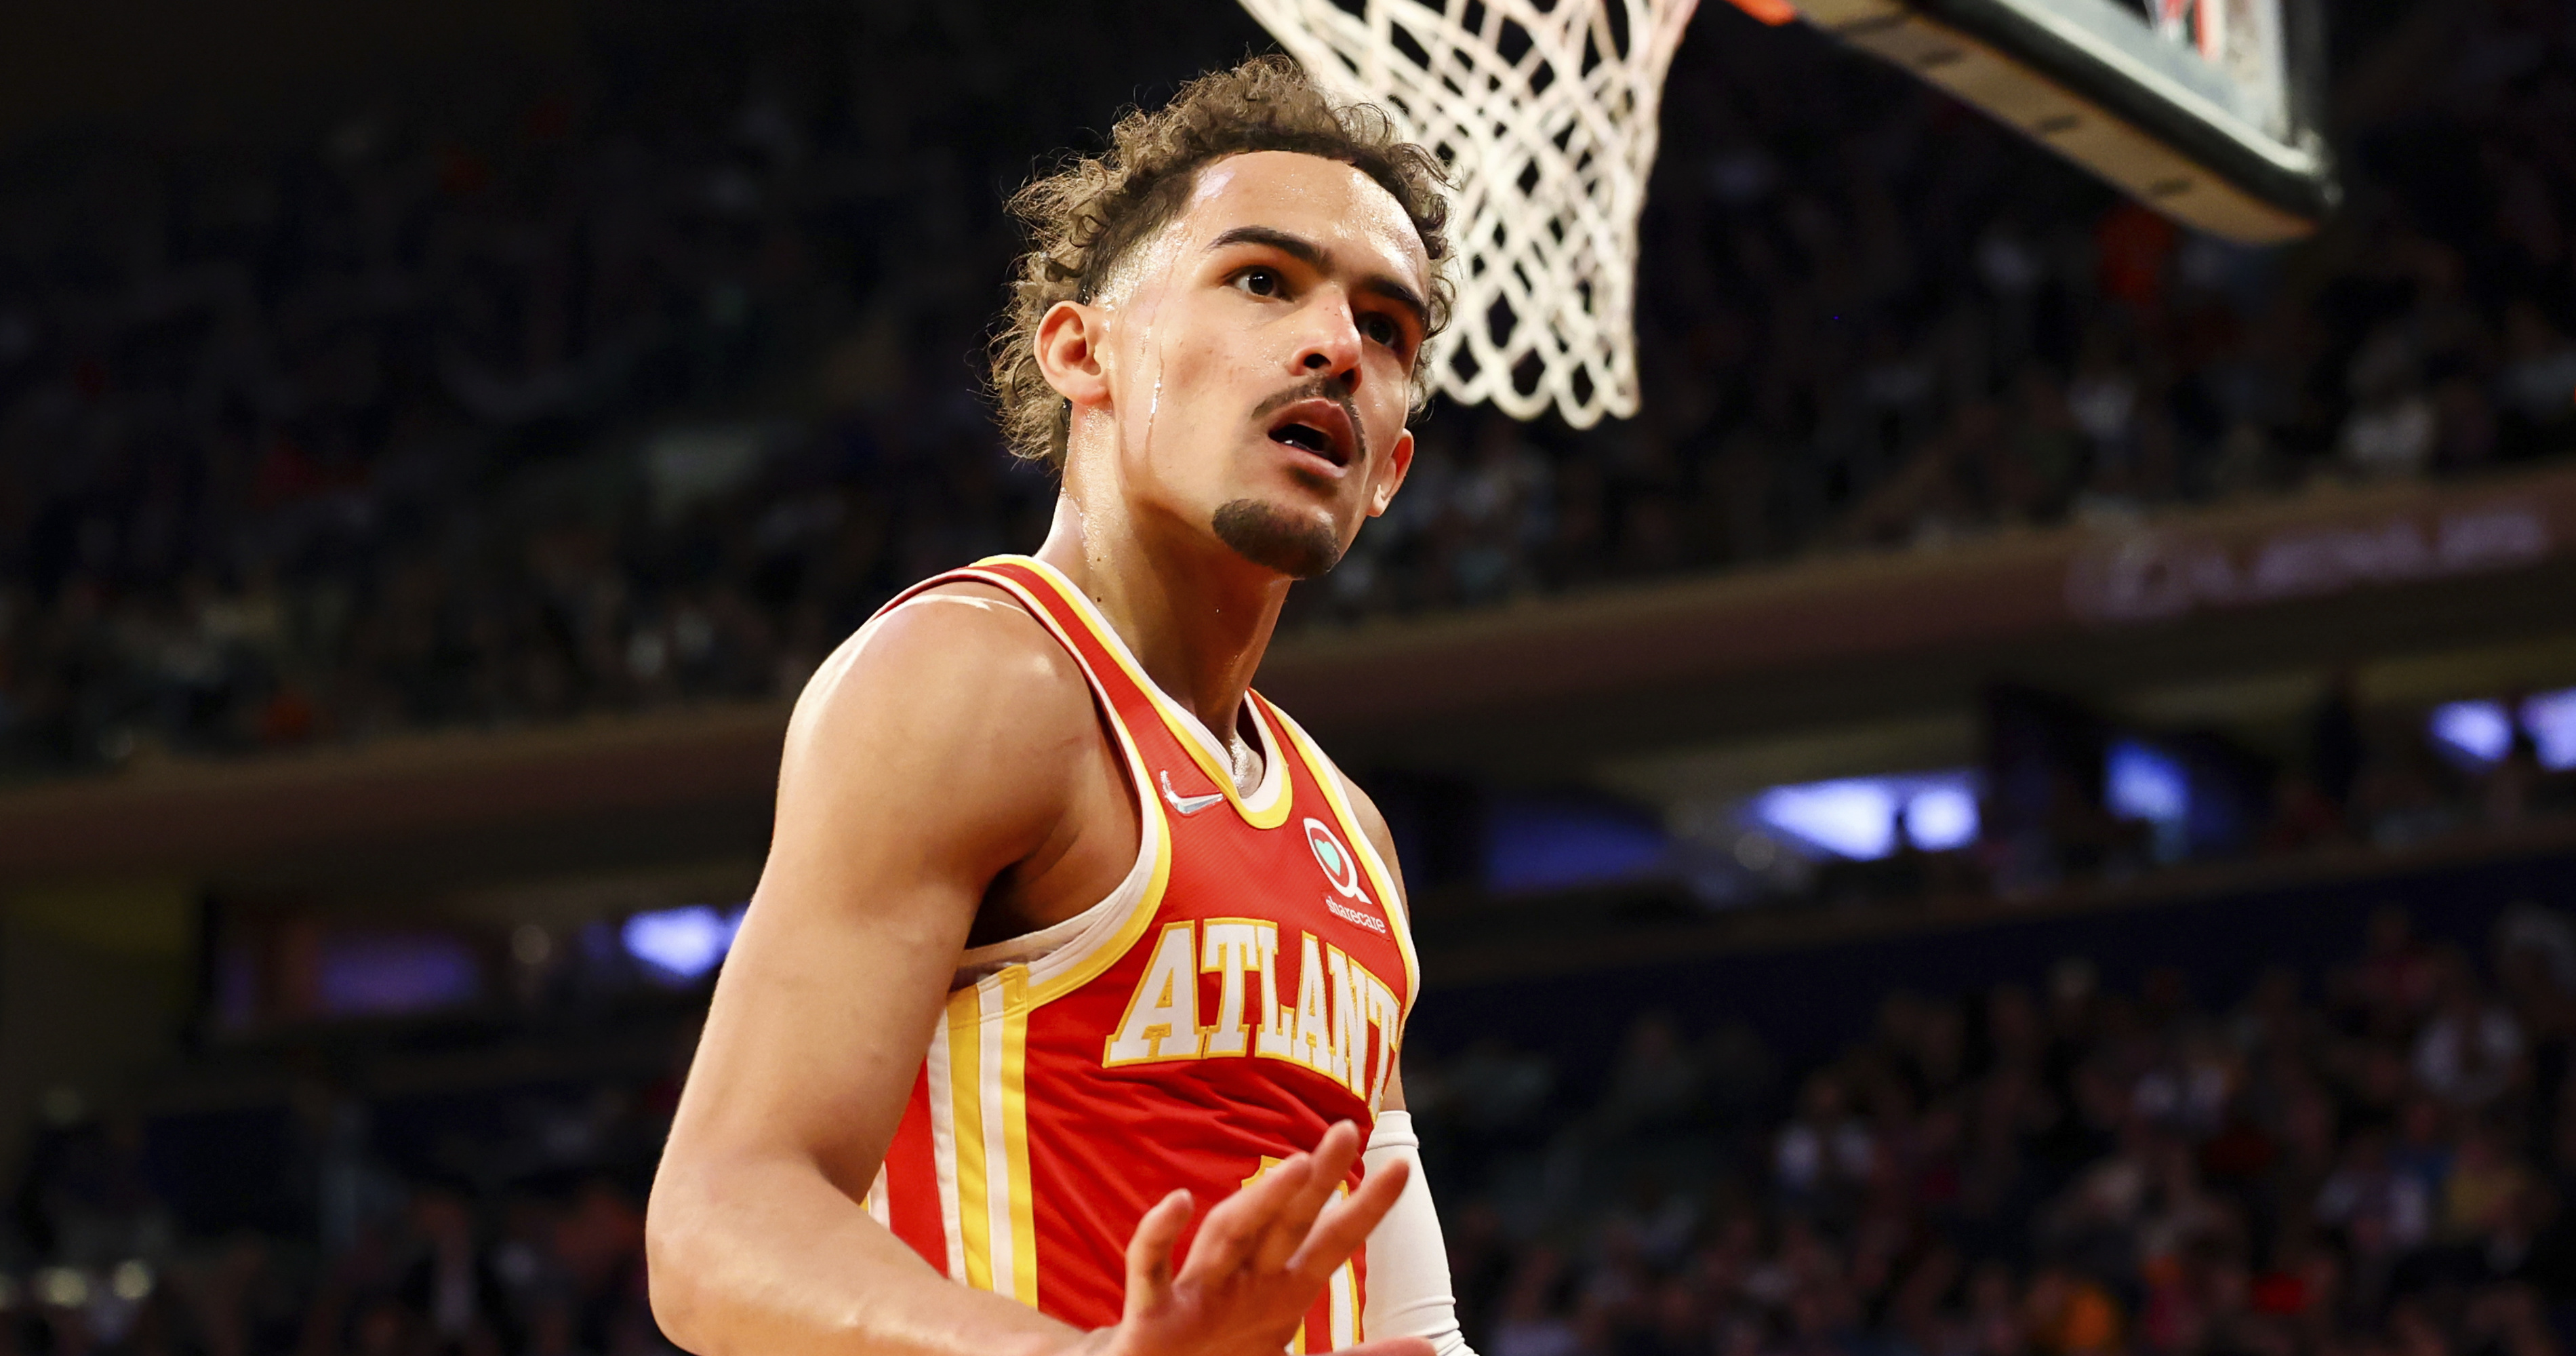 Bill de Blasio calls out Trae Young after Knicks' loss to Hawks